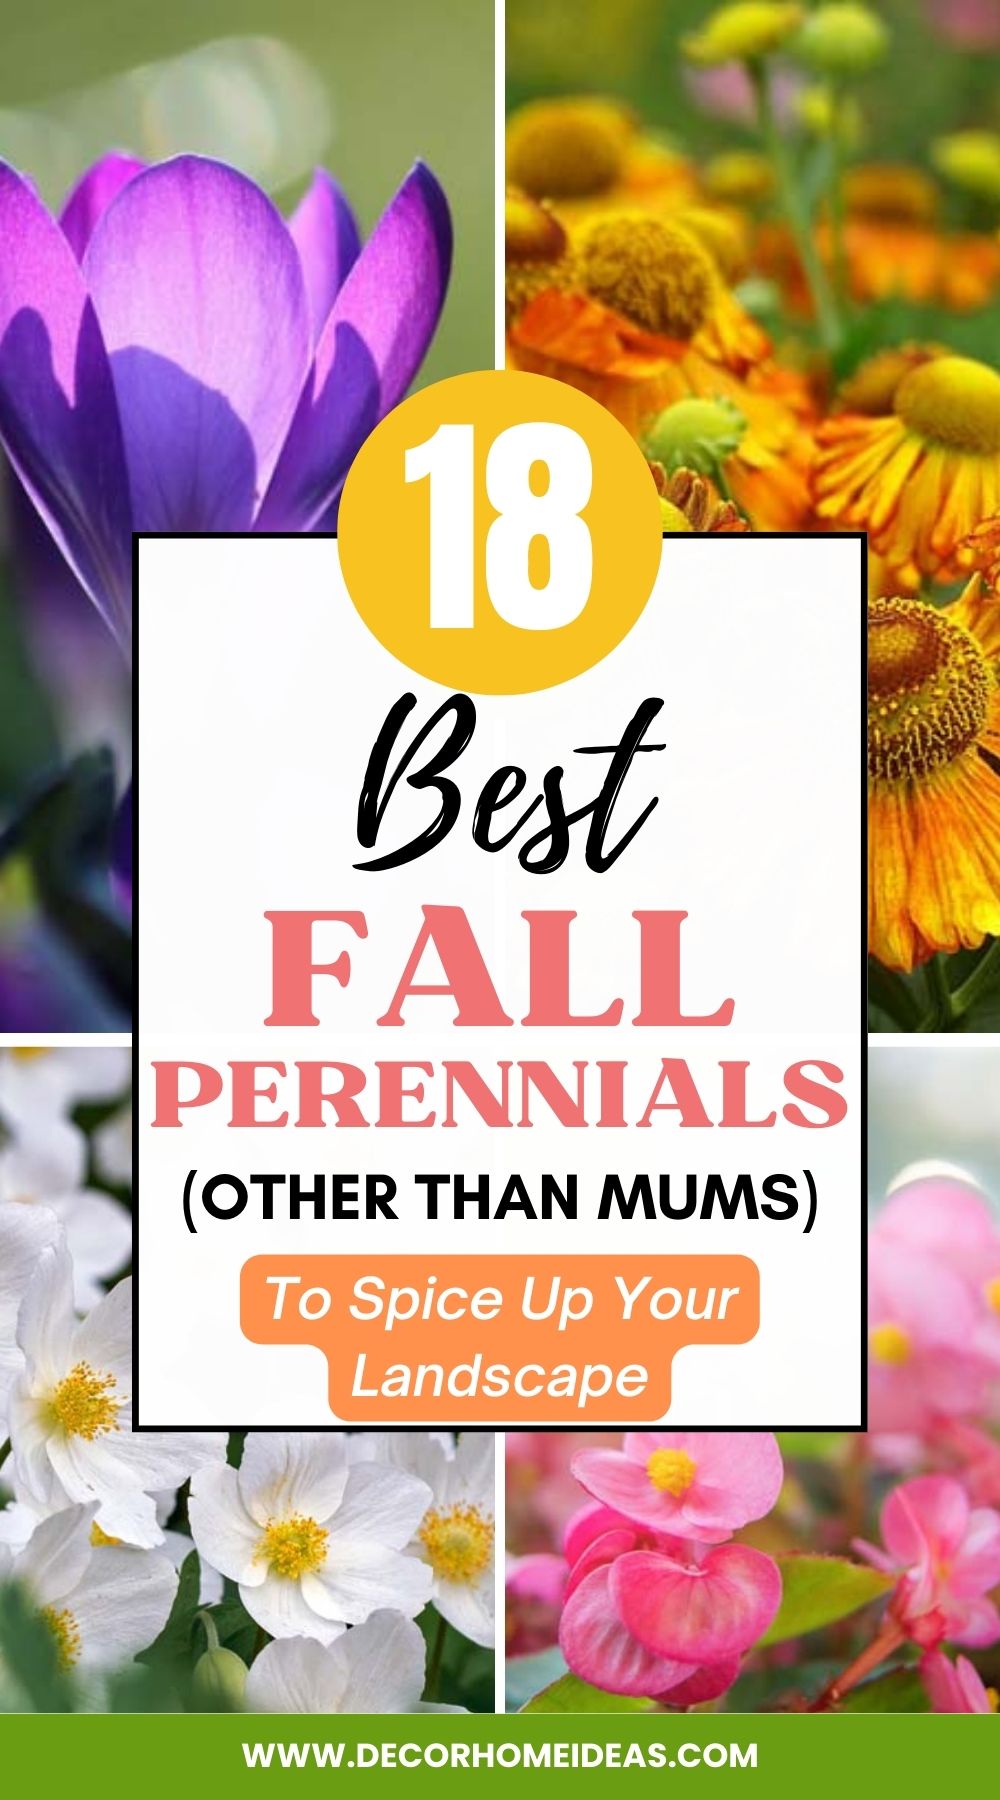 Revitalize your landscape this autumn with the 18 best fall perennials, offering vibrant hues beyond the traditional mums. Explore a diverse array of perennial options that will add a splash of color and texture to your outdoor space throughout the fall season.